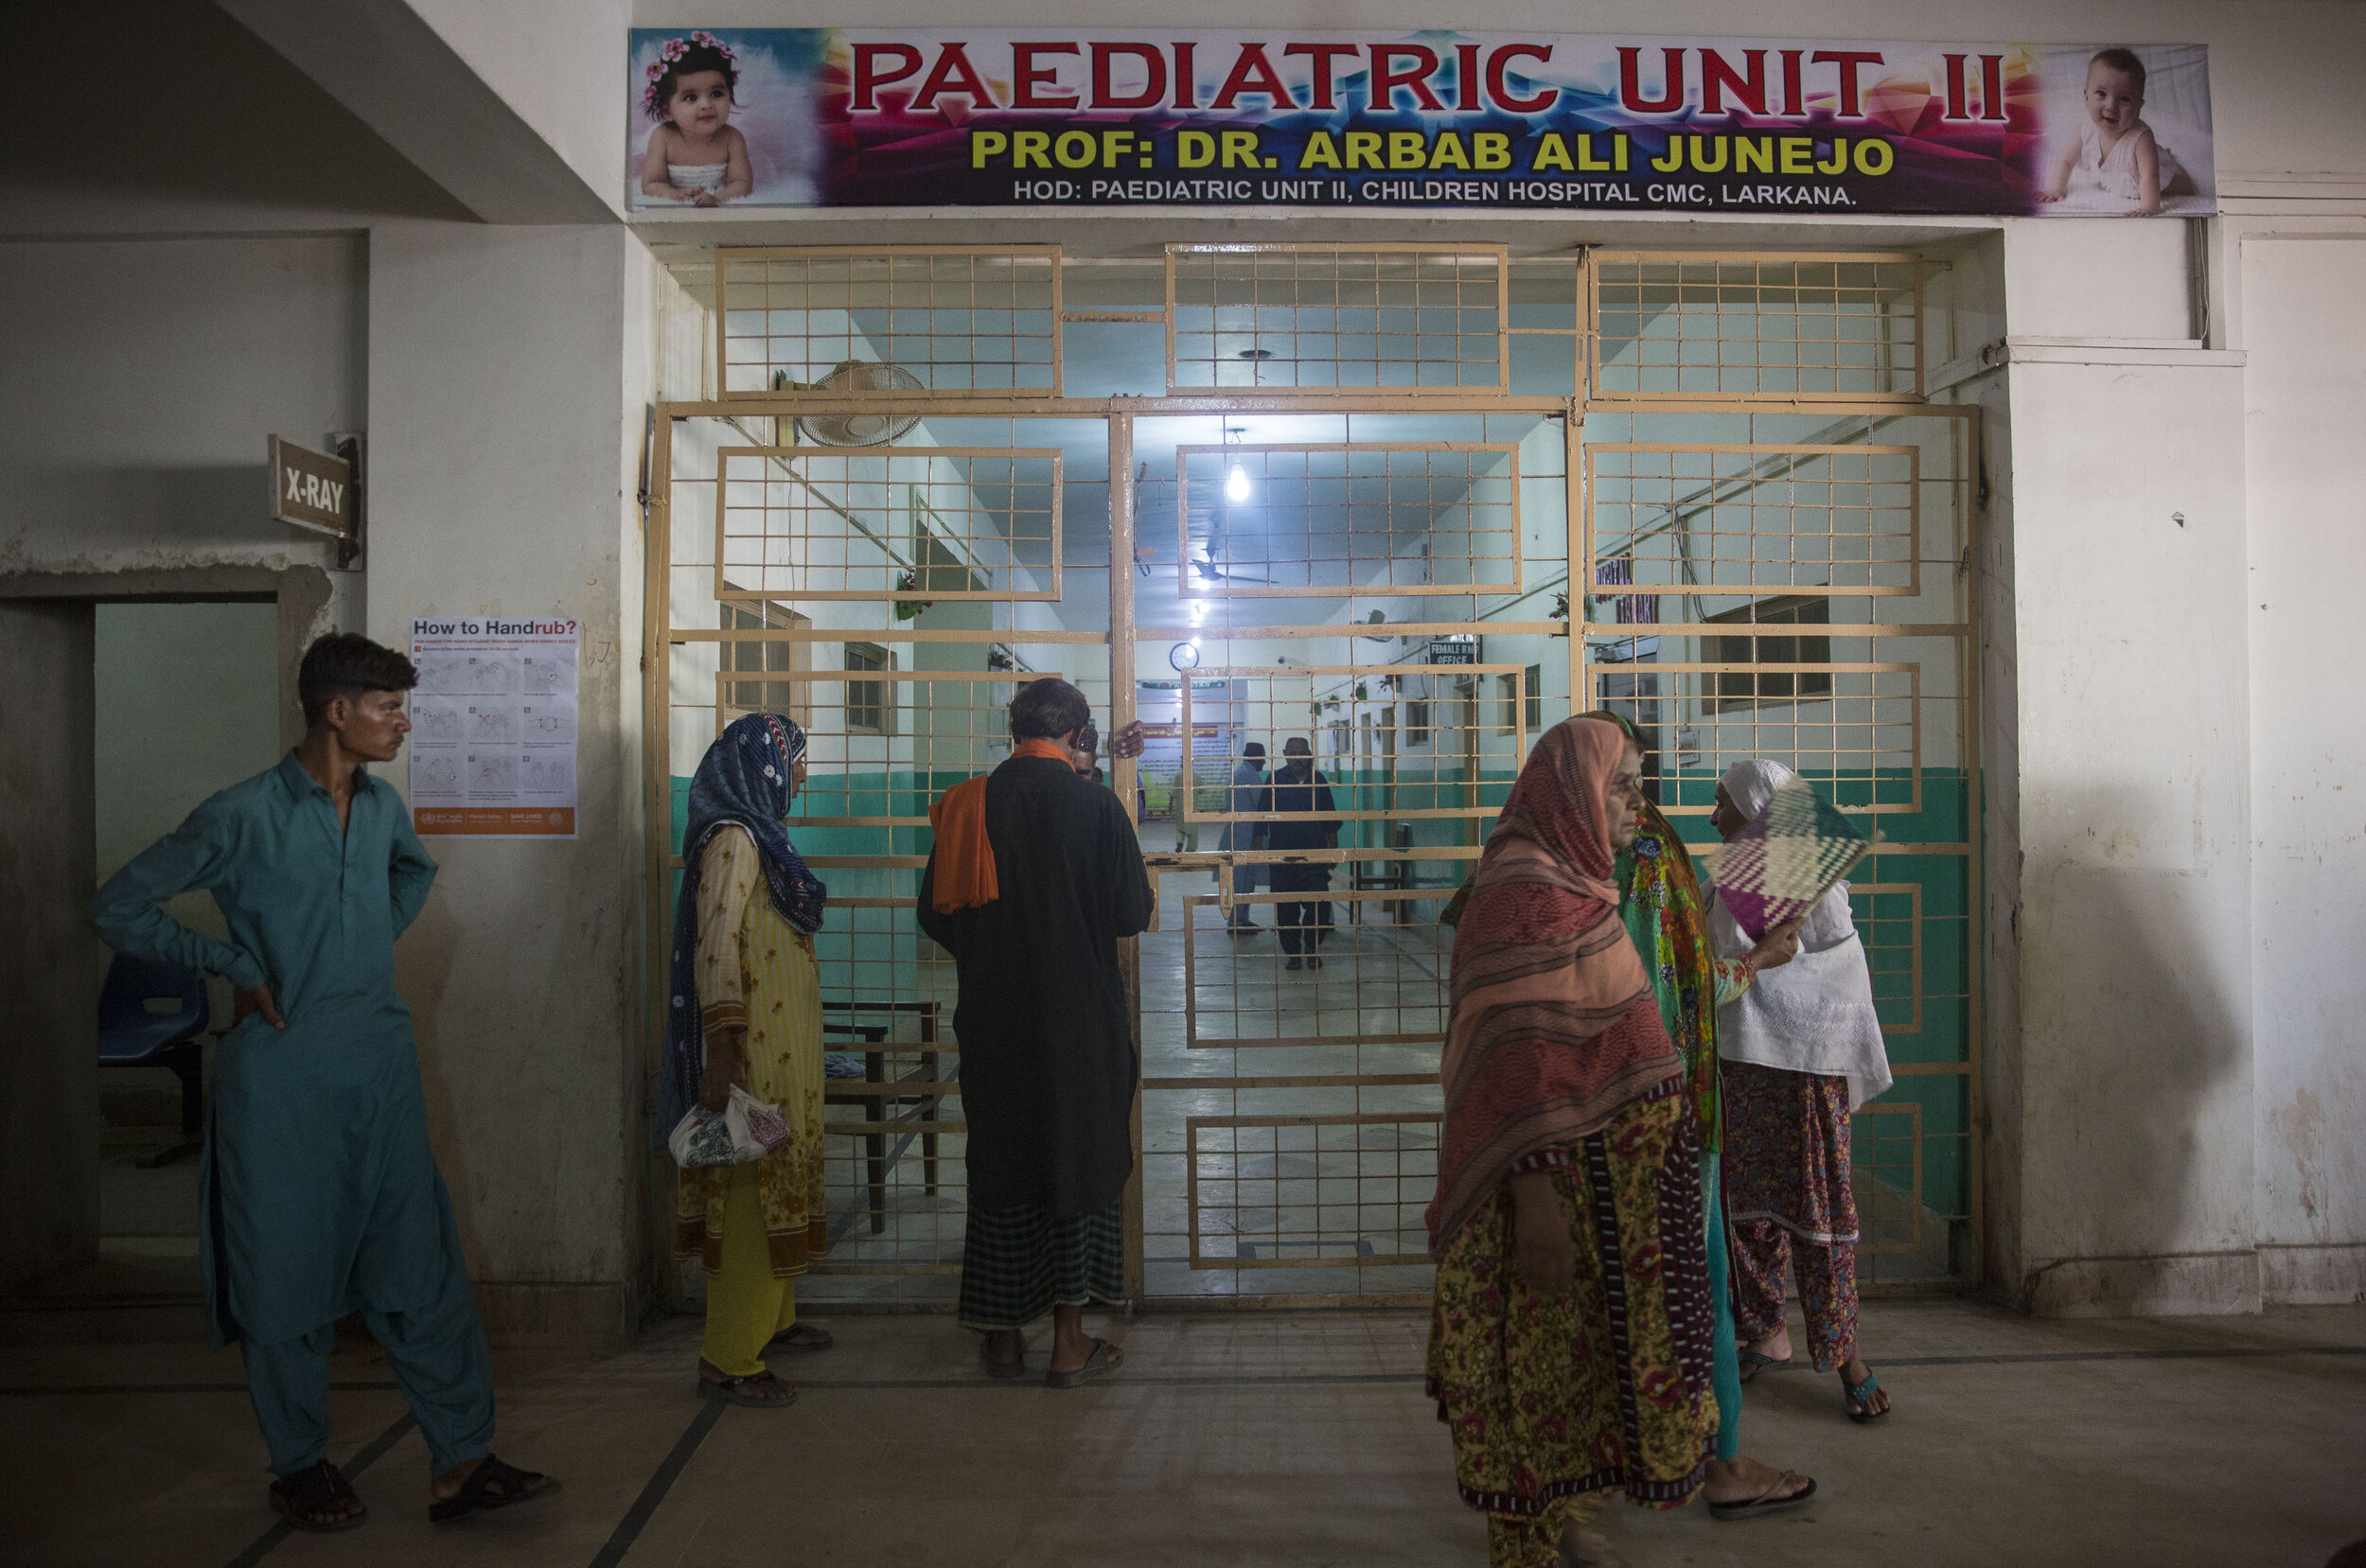  Paediatric Unit which is being used to treat children with HIV in Sheikh Zaid Hospital on July 26, 2019 in Larkana, Sind, Pakistan. 